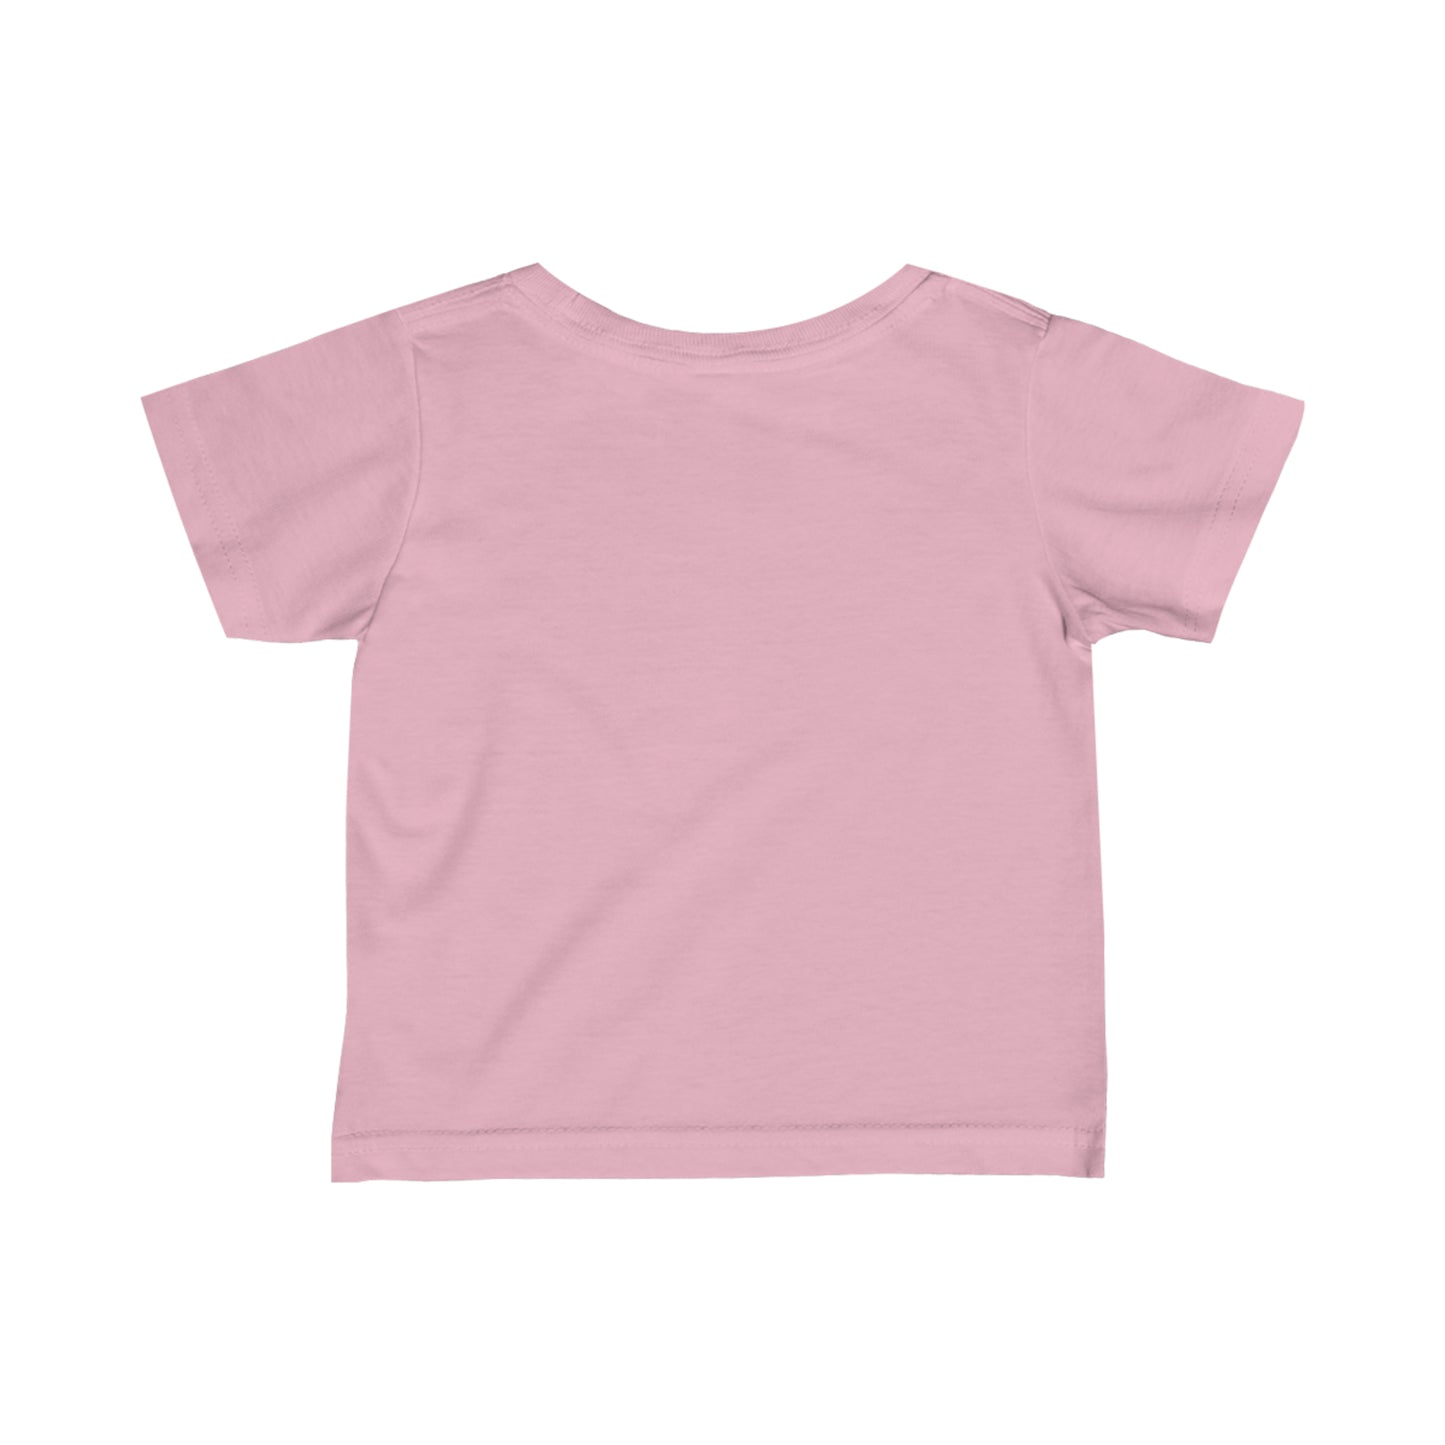 Proud Dragonfly Collection: Brother  Infant Fine Jersey Tee